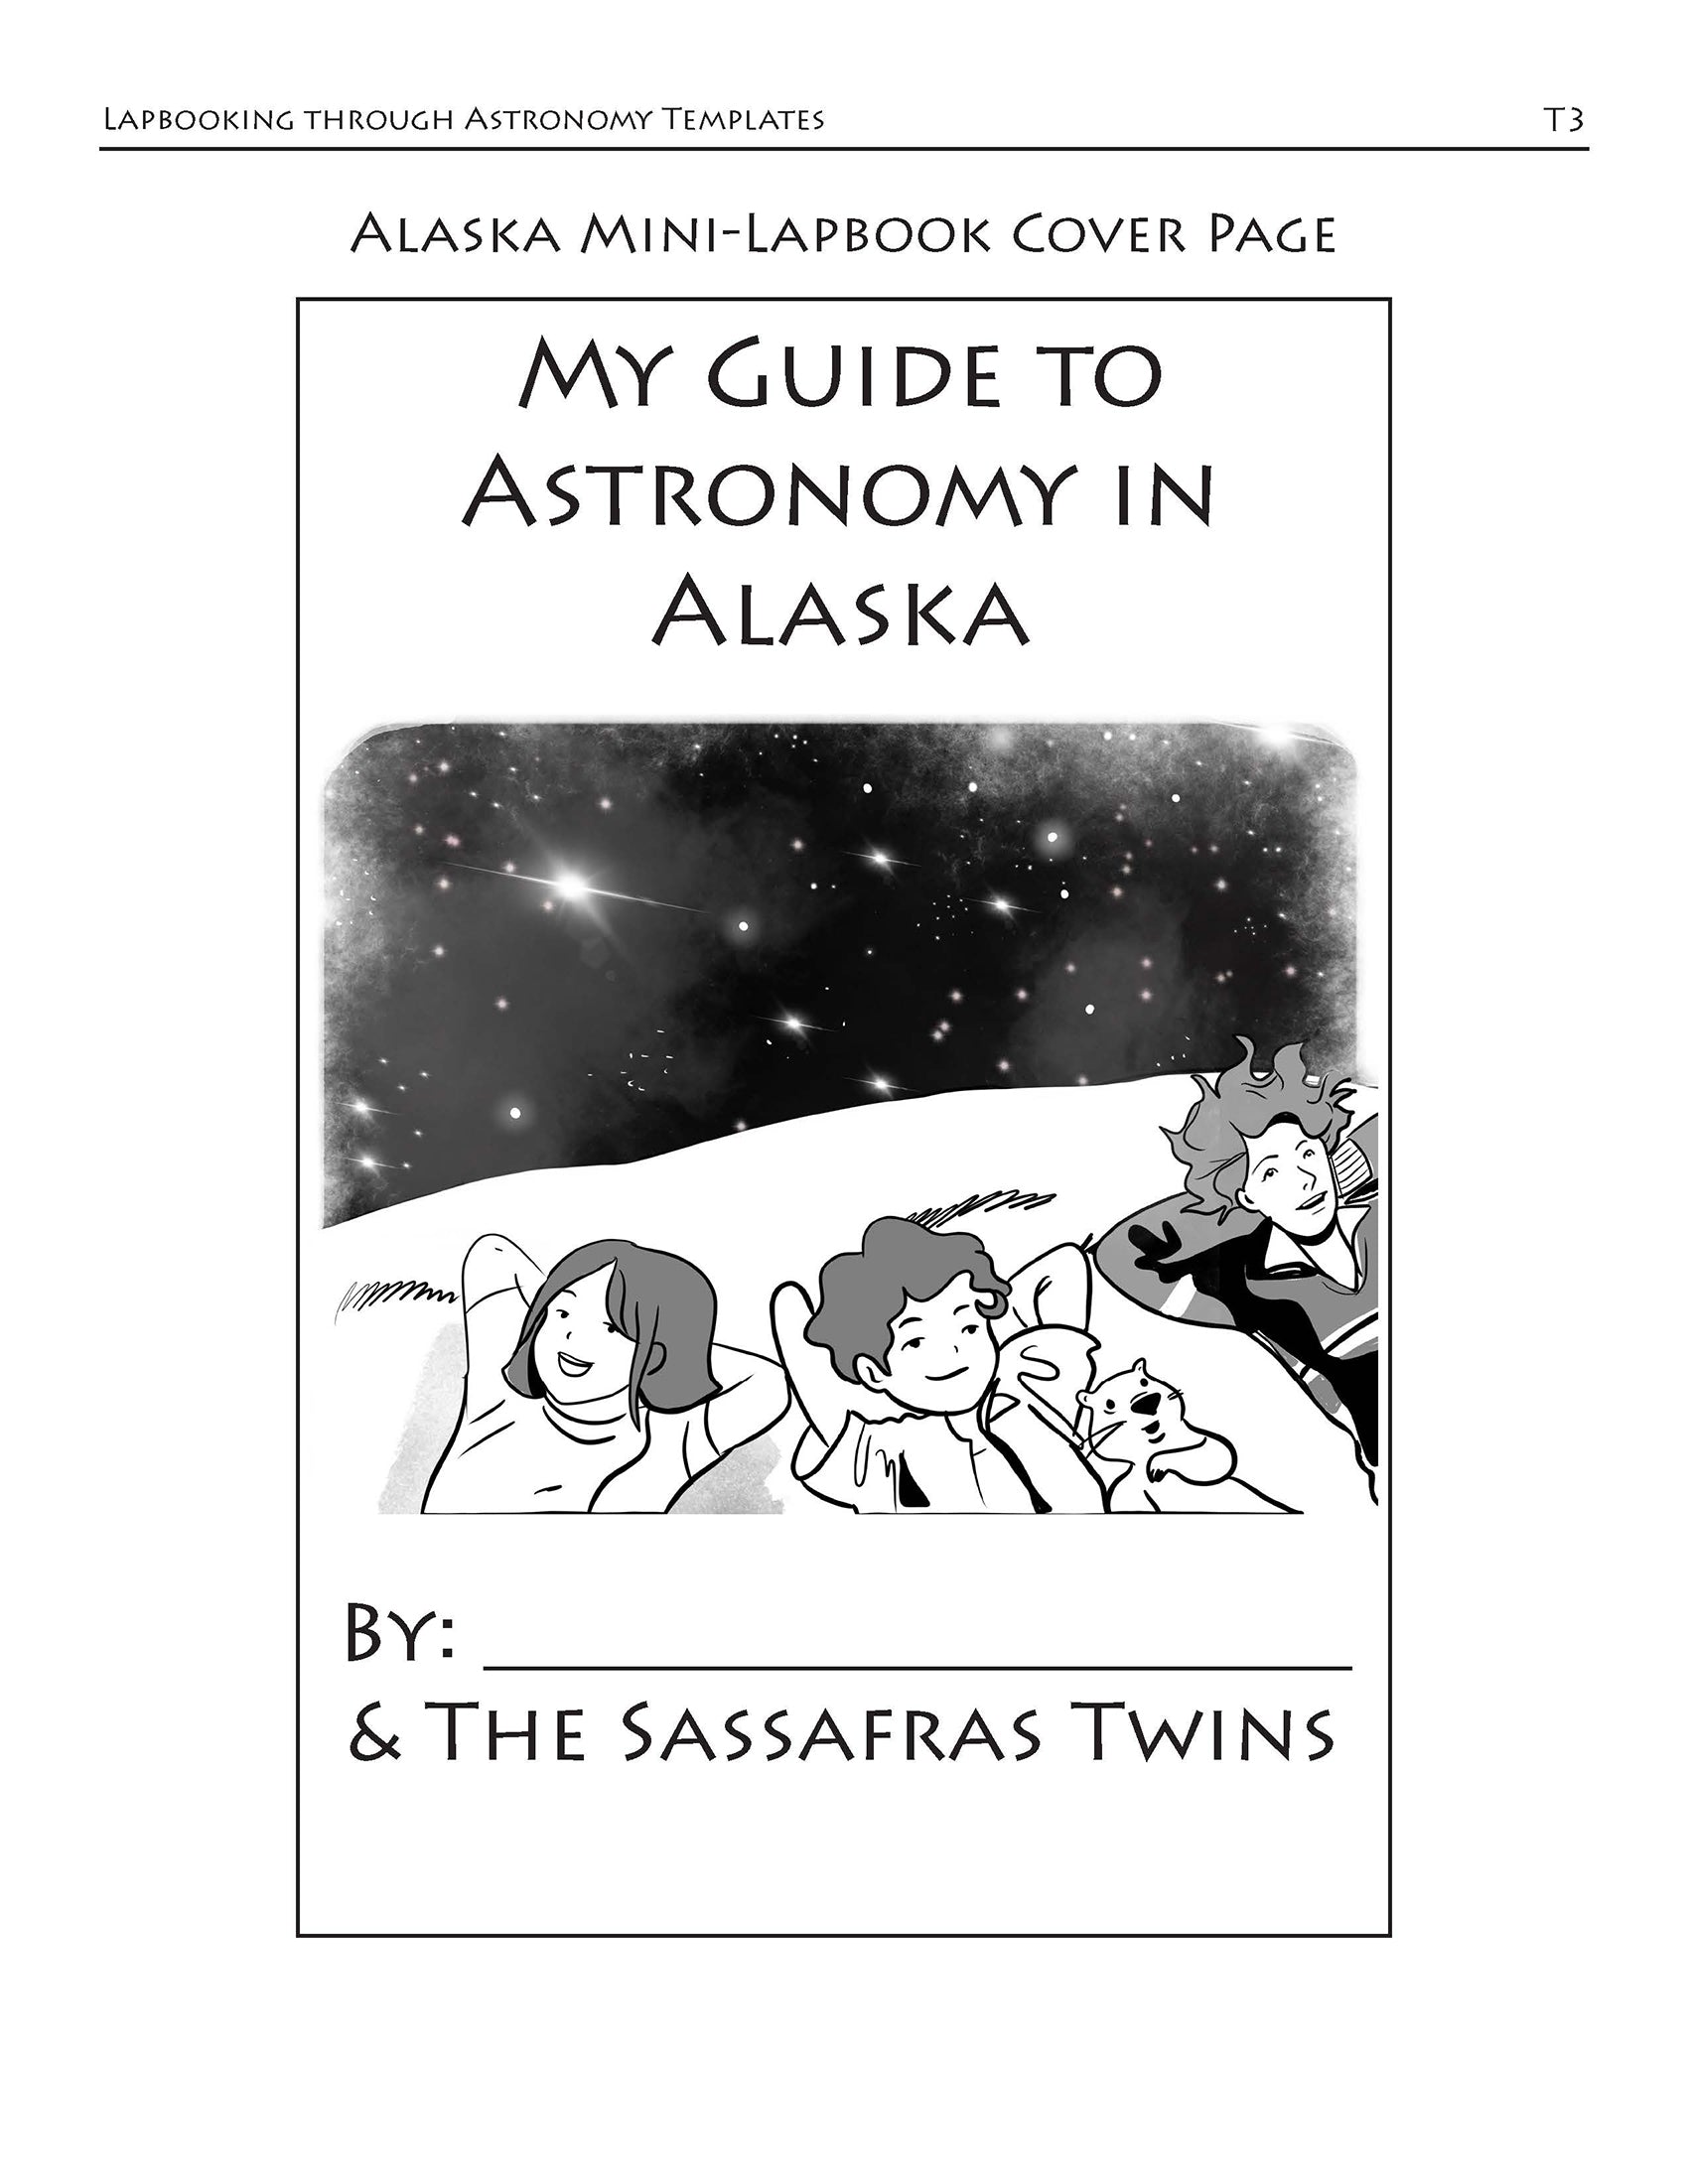 Lapbooking through Astronomy with the Sassafras Twins